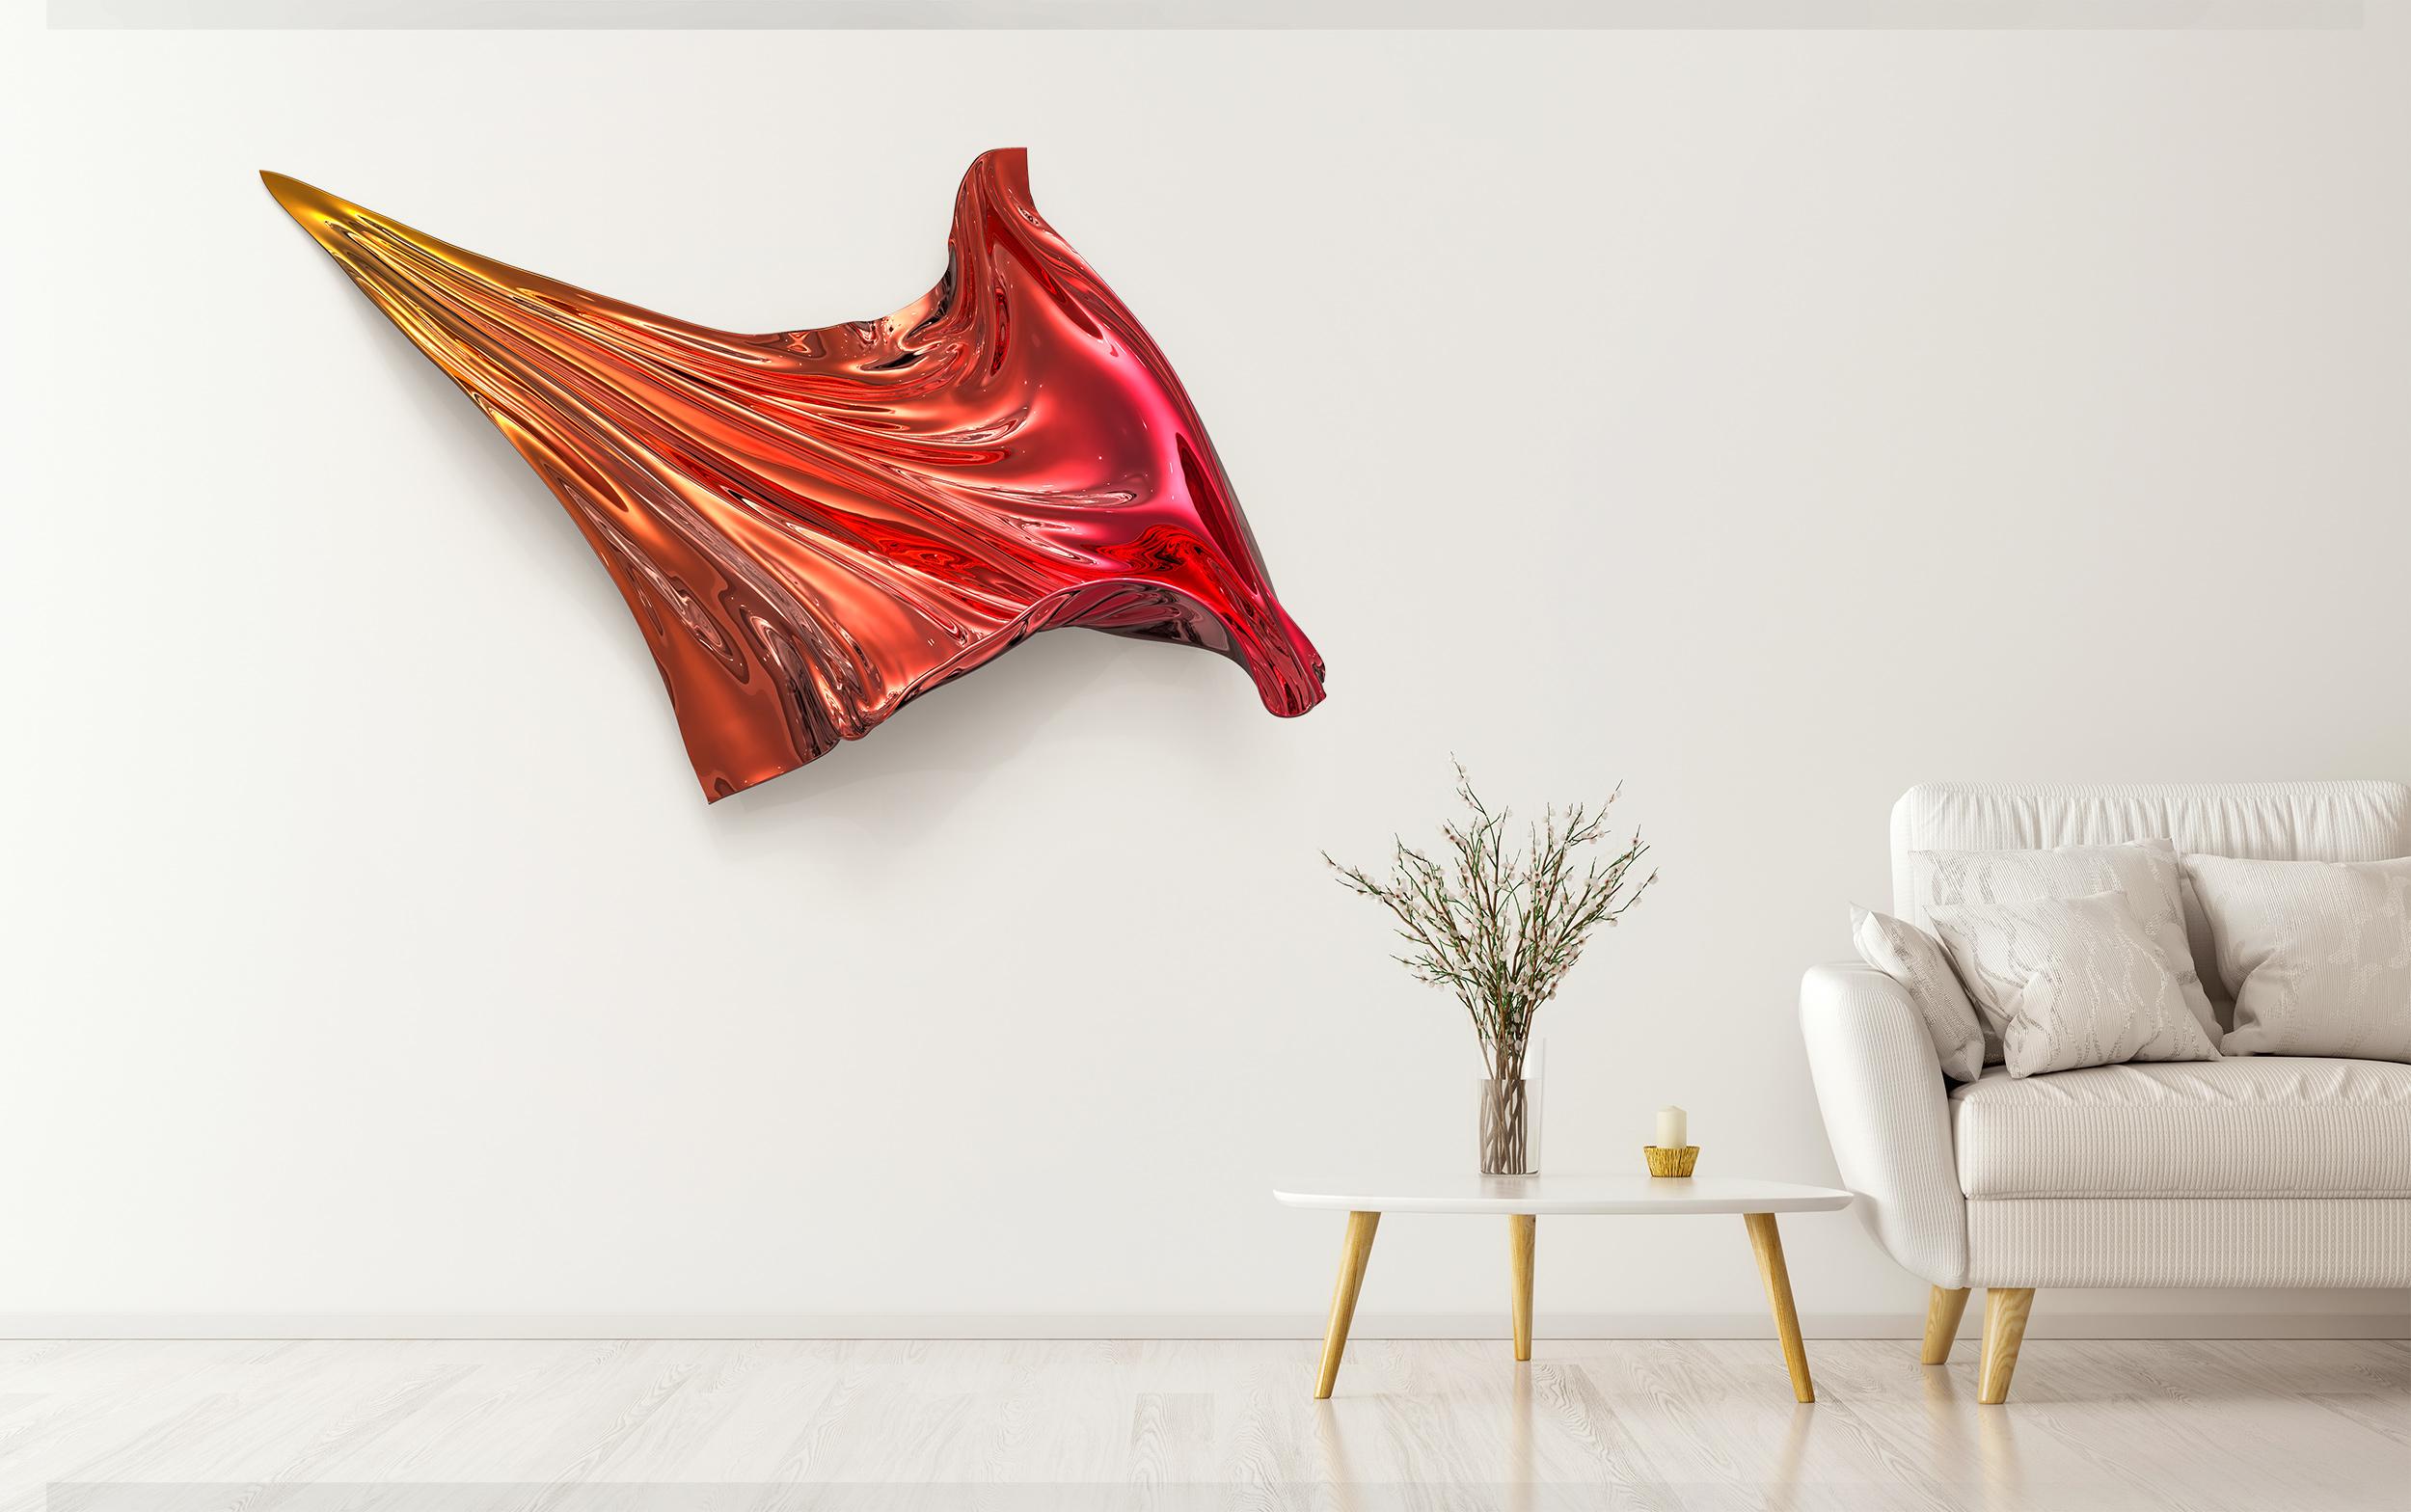 Levitaz Wall Panel IV resonates with the temporality of motion, its form capturing the fluid dance between form and the forces that sculpt it. Cast in resplendent chrome, this piece by Katz Studio draws the gaze into the depths of its dynamic